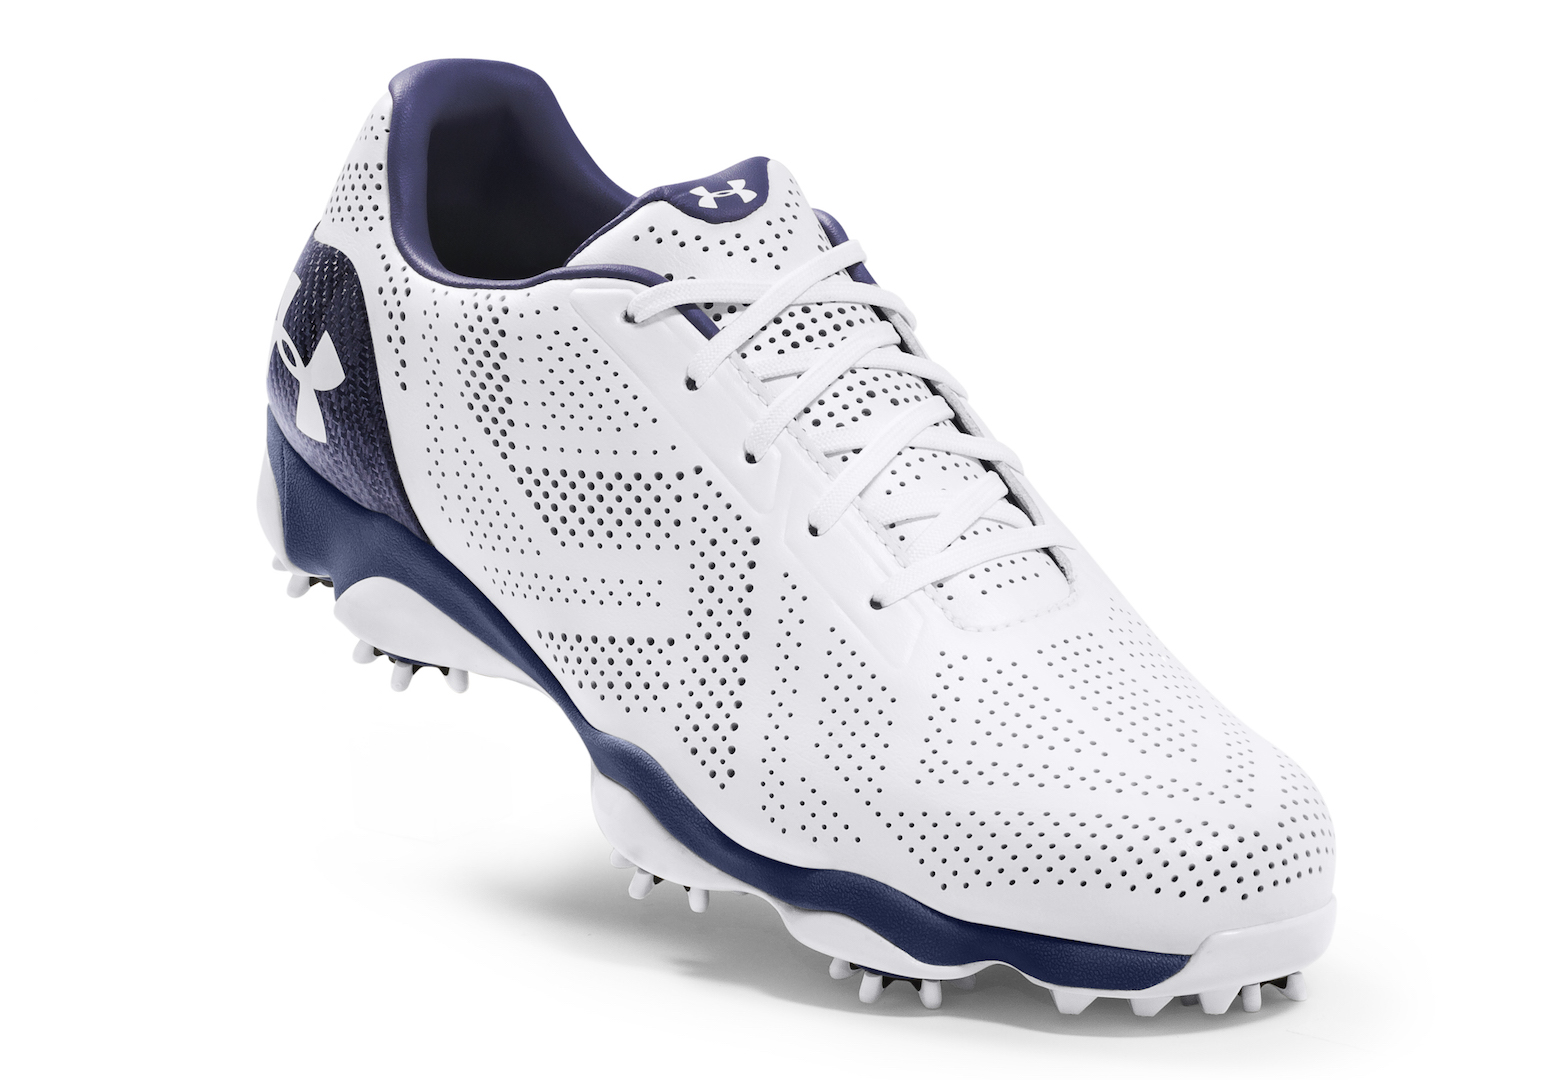 new under armour basketball shoes 2015